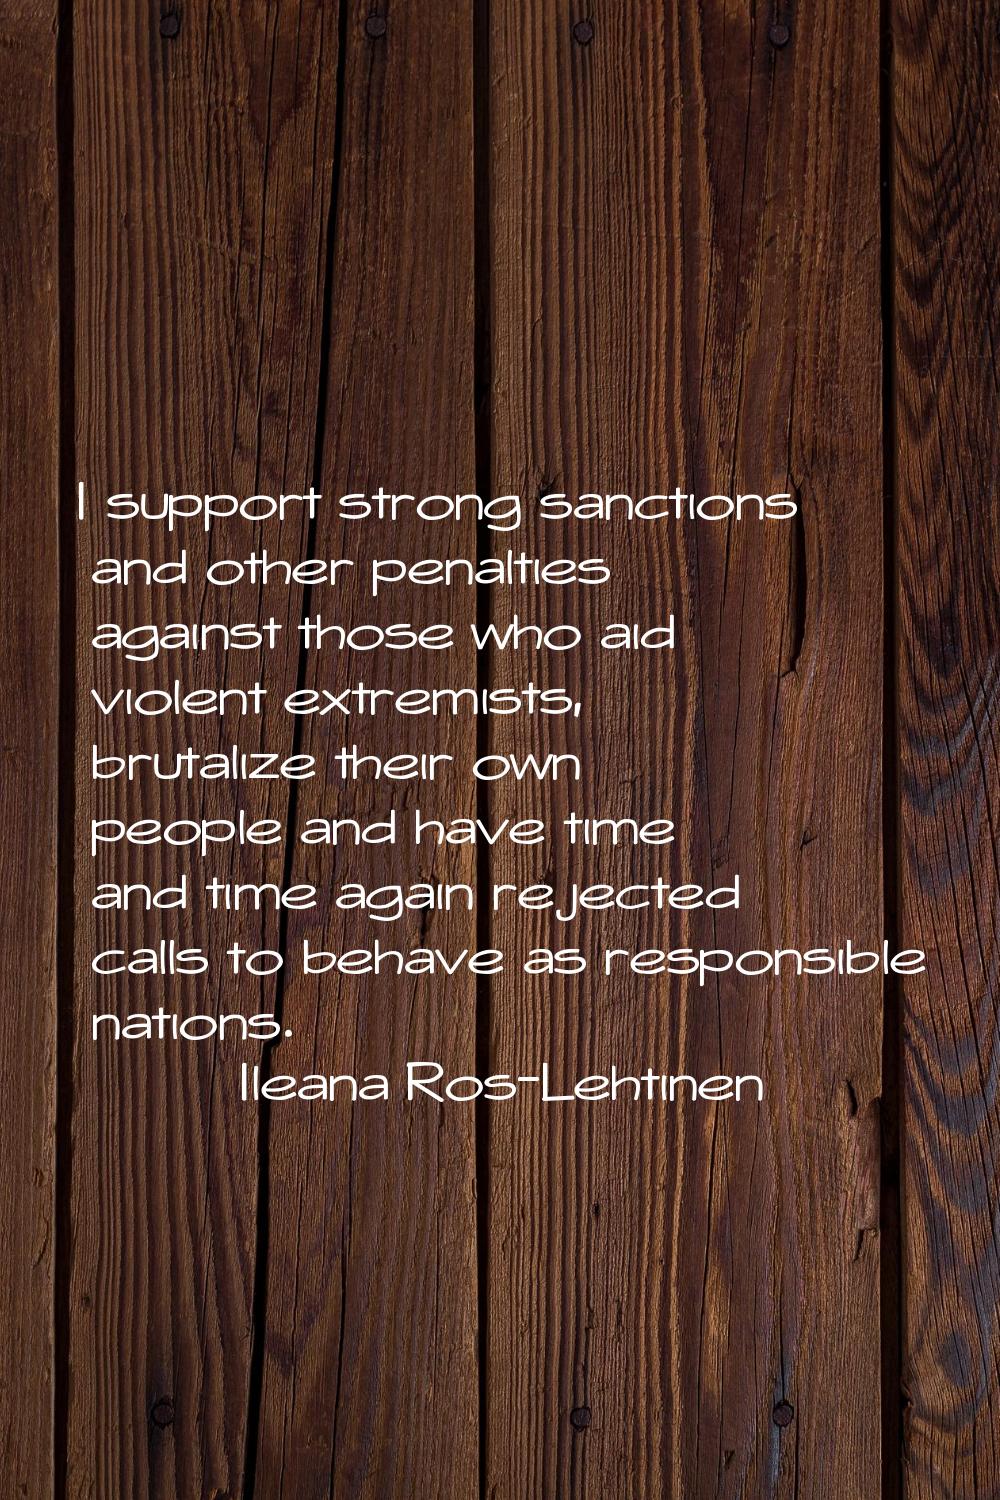 I support strong sanctions and other penalties against those who aid violent extremists, brutalize 